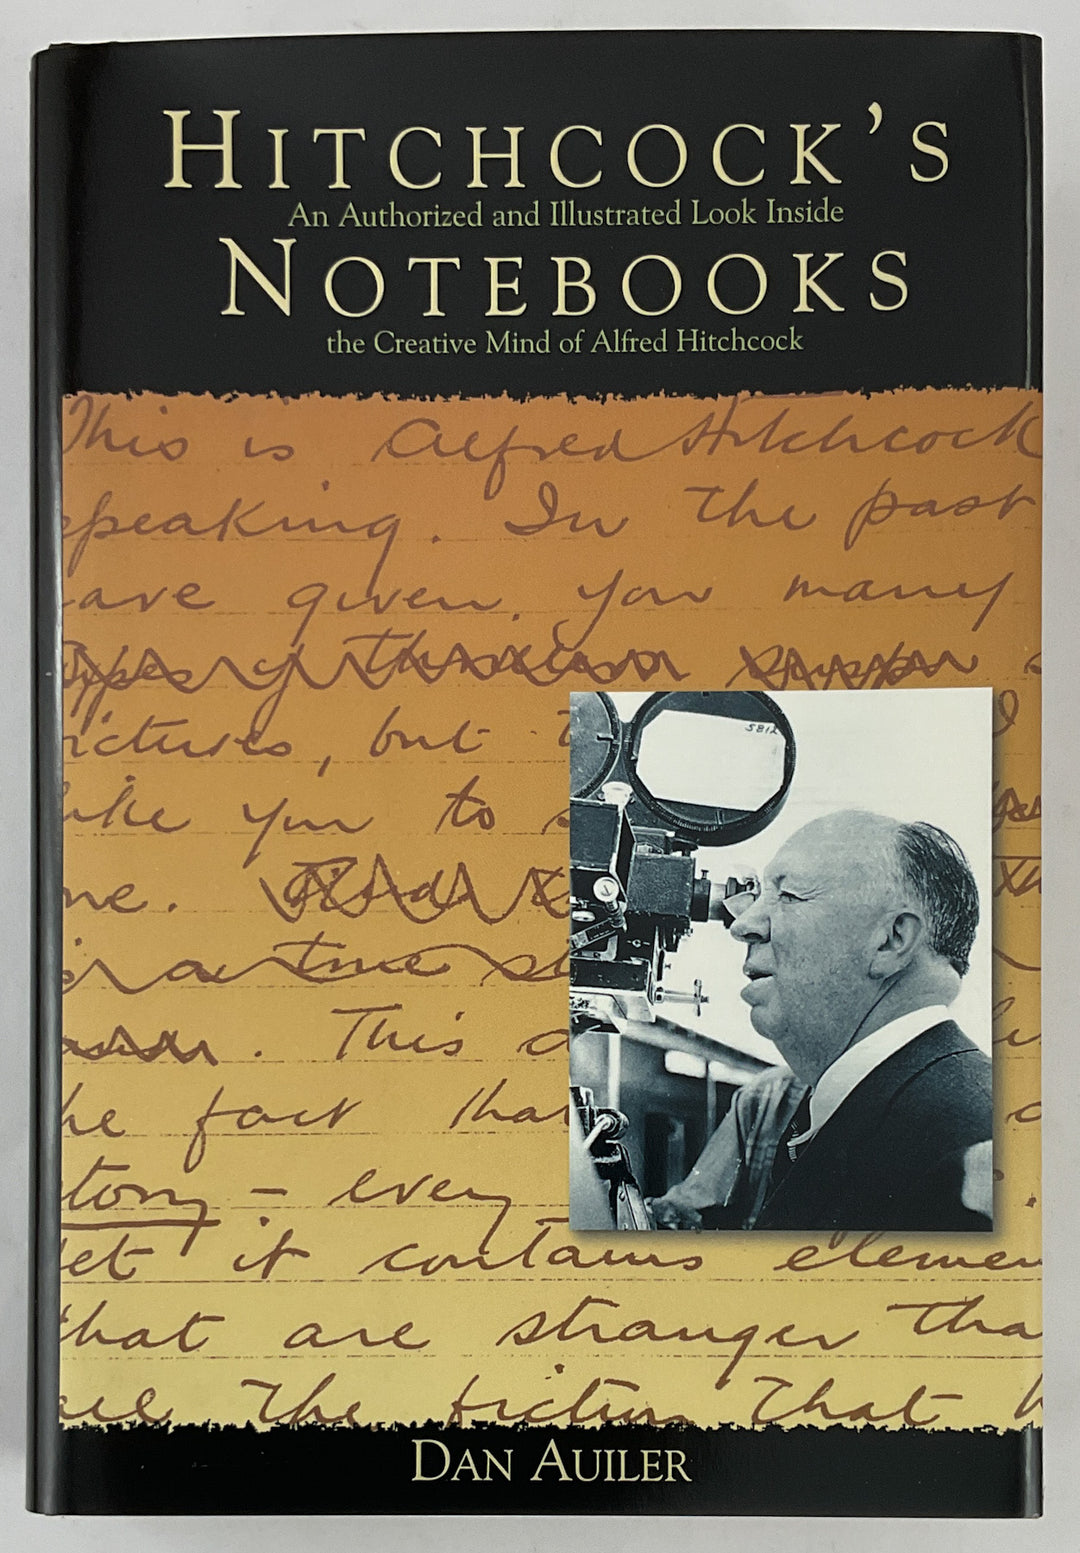 Hitchcock's Notebooks: An Authorized and Illustrated Look Inside the Creative Mind of Alfred Hitchcook